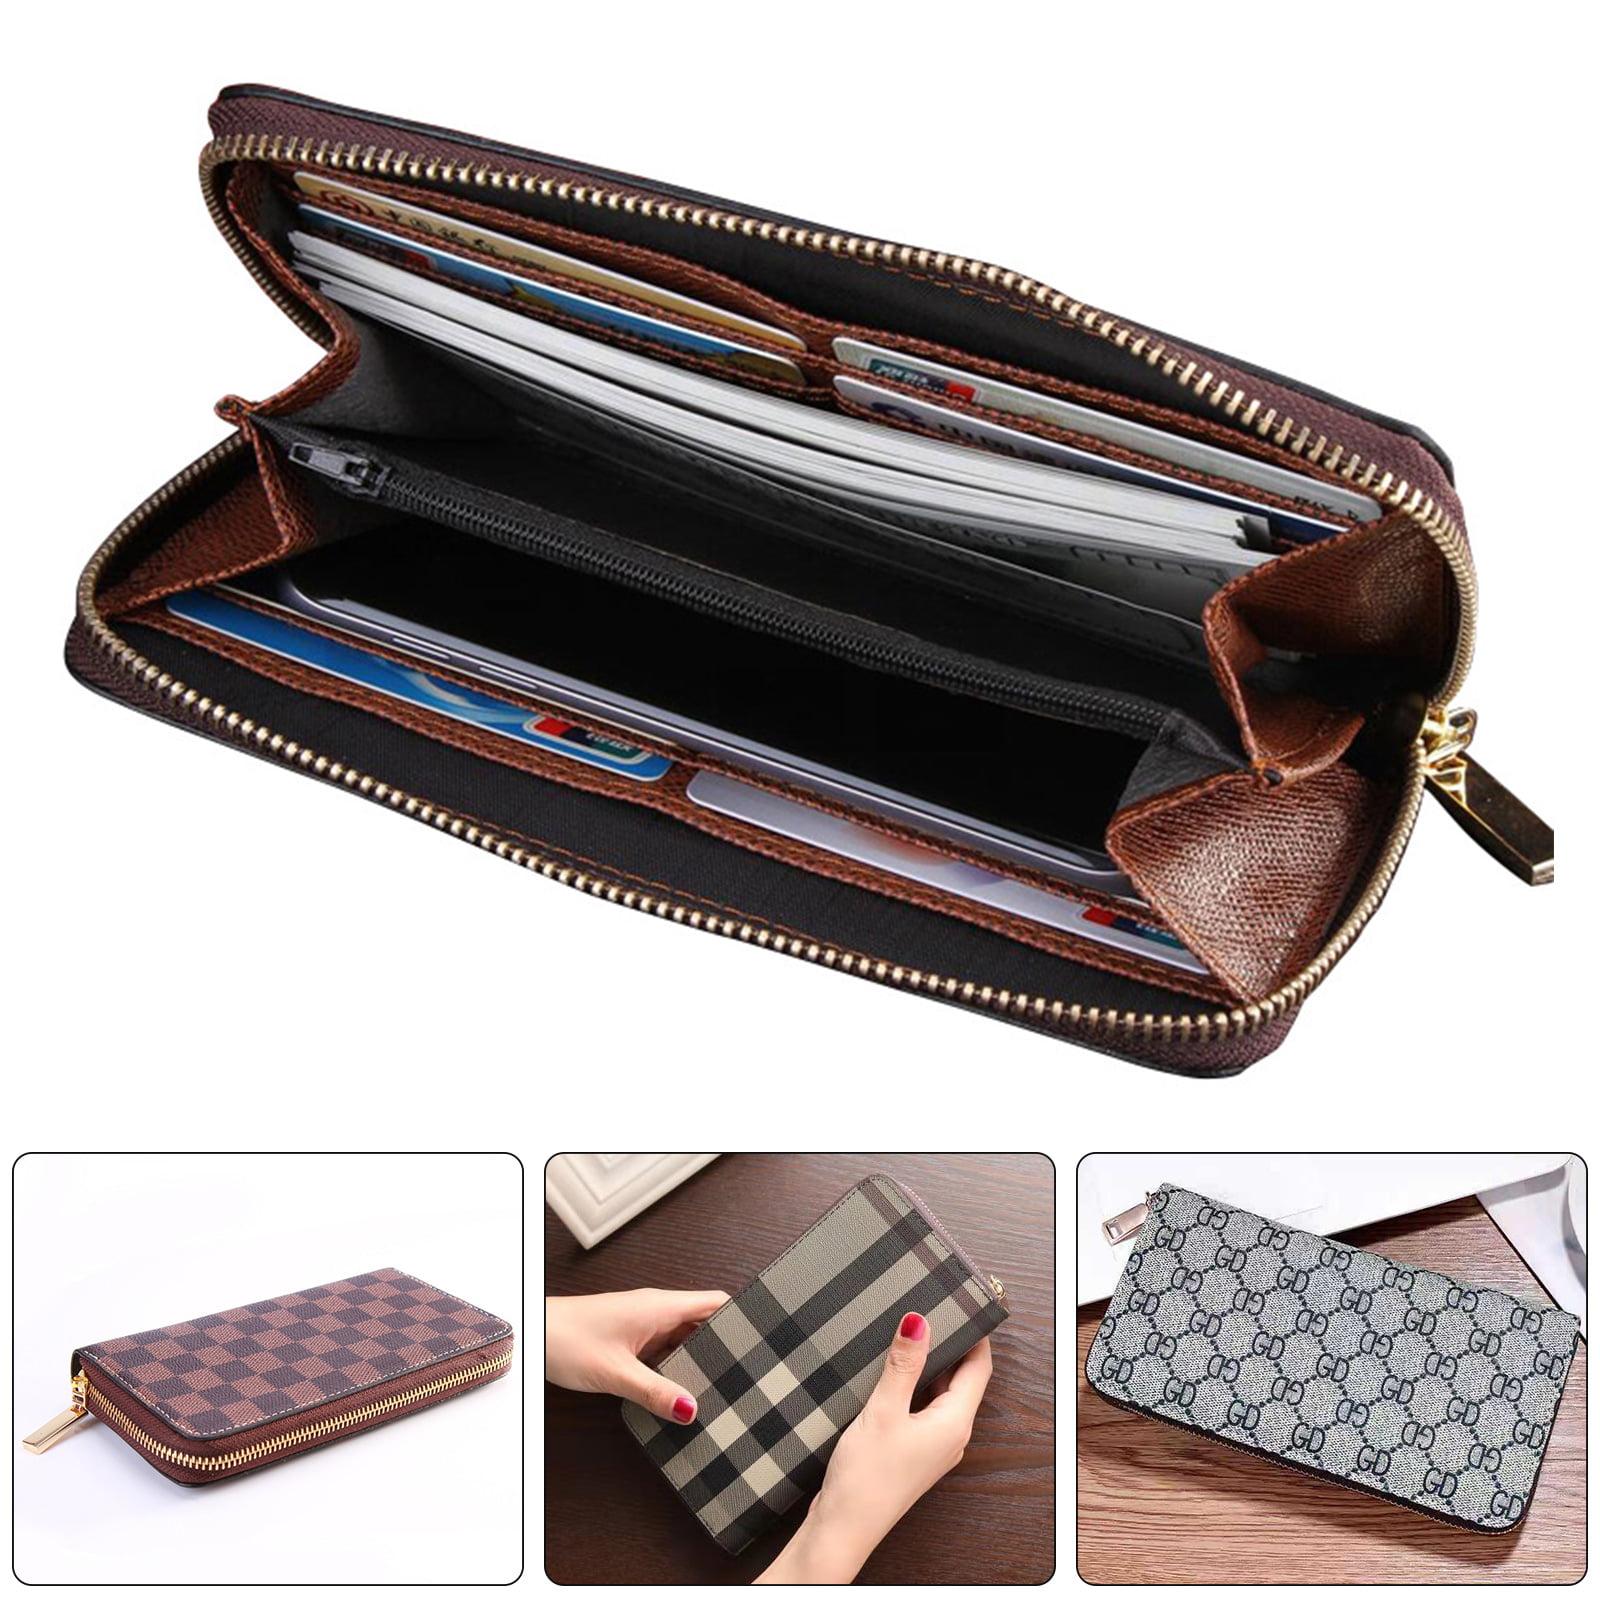 Womens Zip Around Wallet and Phone Clutch,Travel Purse Leather Clutch Bag Card Holder Organizer Wristlets Wallets,Optical Striped Background